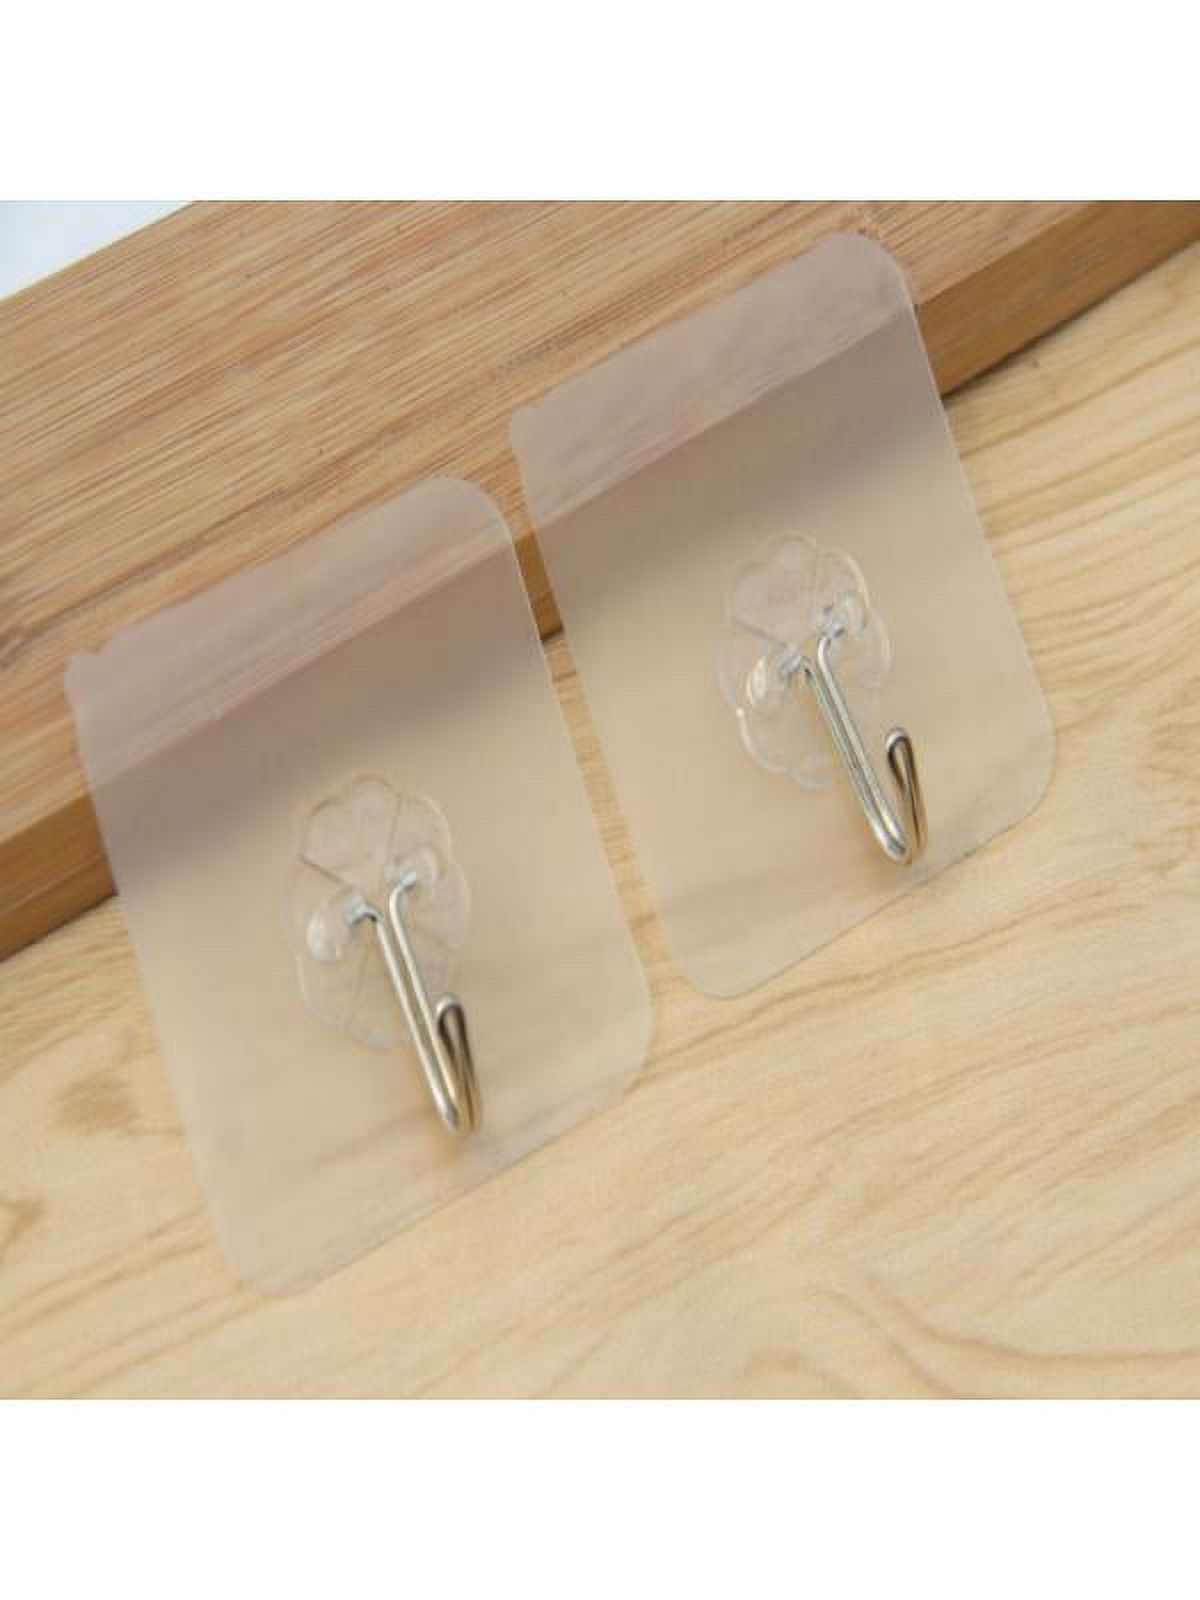 1/2/4/6 Pack Wall Hooks 22lb(Max) Transparent Reusable Seamless Hooks, Waterproof and Oilproof, Bathroom Kitchen Heavy Duty Self Adhesive Hooks - image 3 of 6